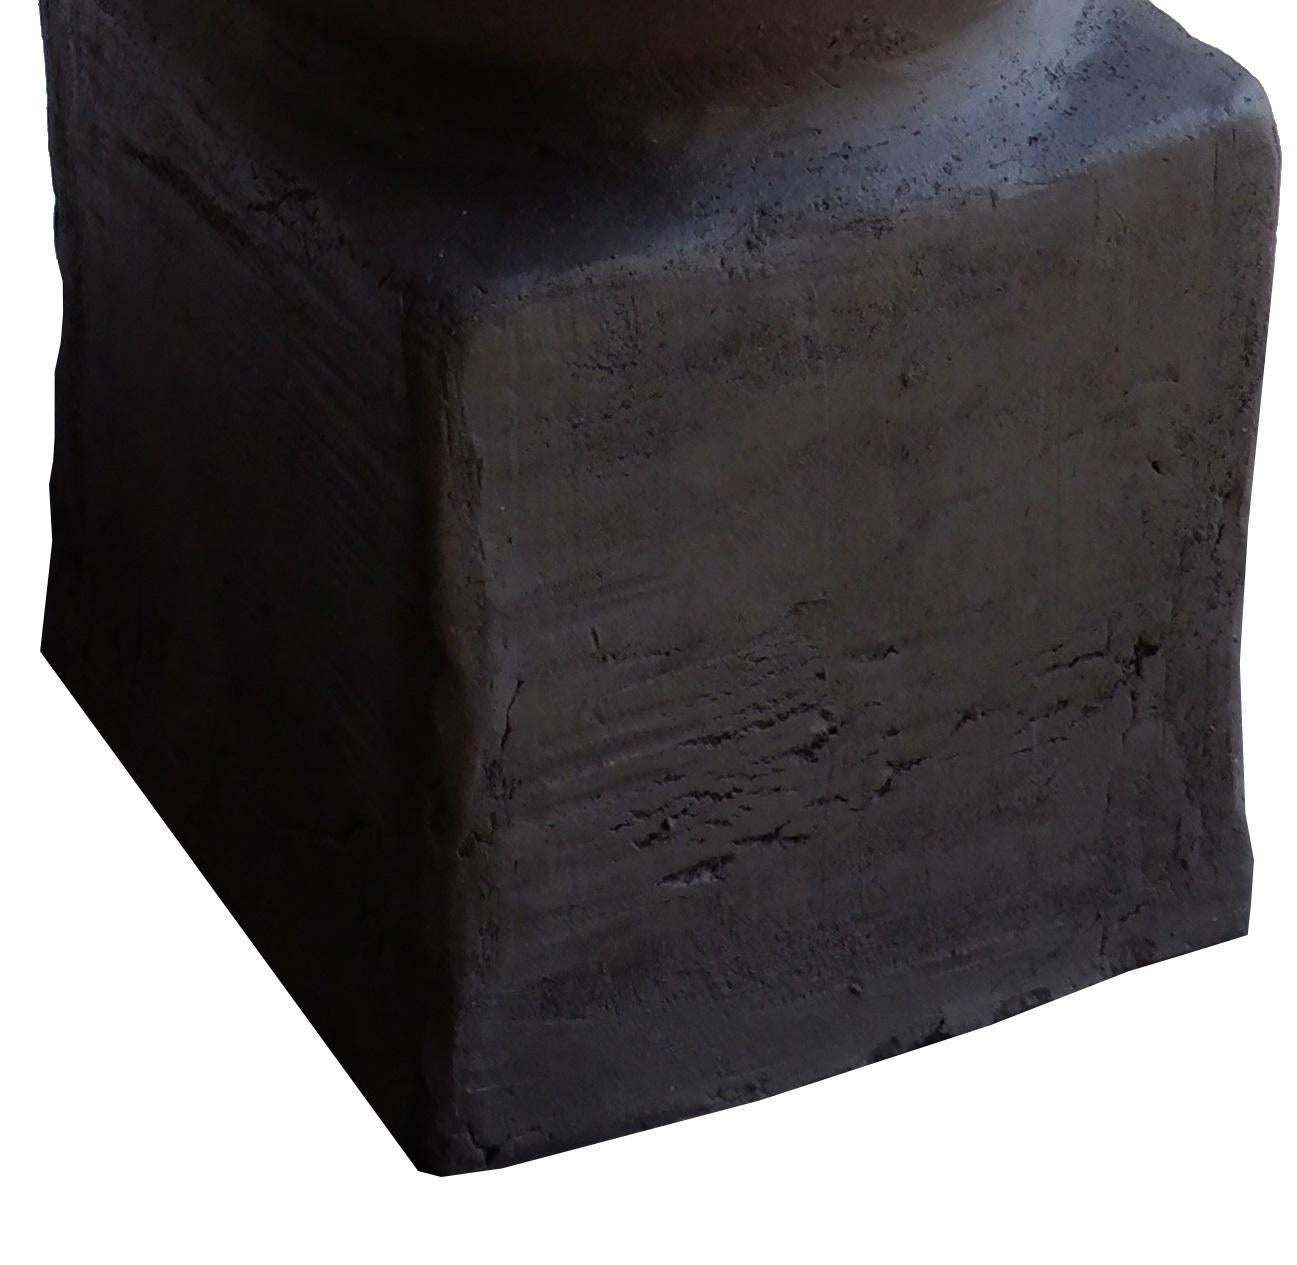 Rous Table Lamp by Ia Kutateladze
One Of A Kind.
Dimensions: Ø 18 x H 42 cm.
Materials: Clay.

Each piece is one of a kind, due to its free hand-building process. Different color variations available: raw black clay, raw white clay and raw red clay.